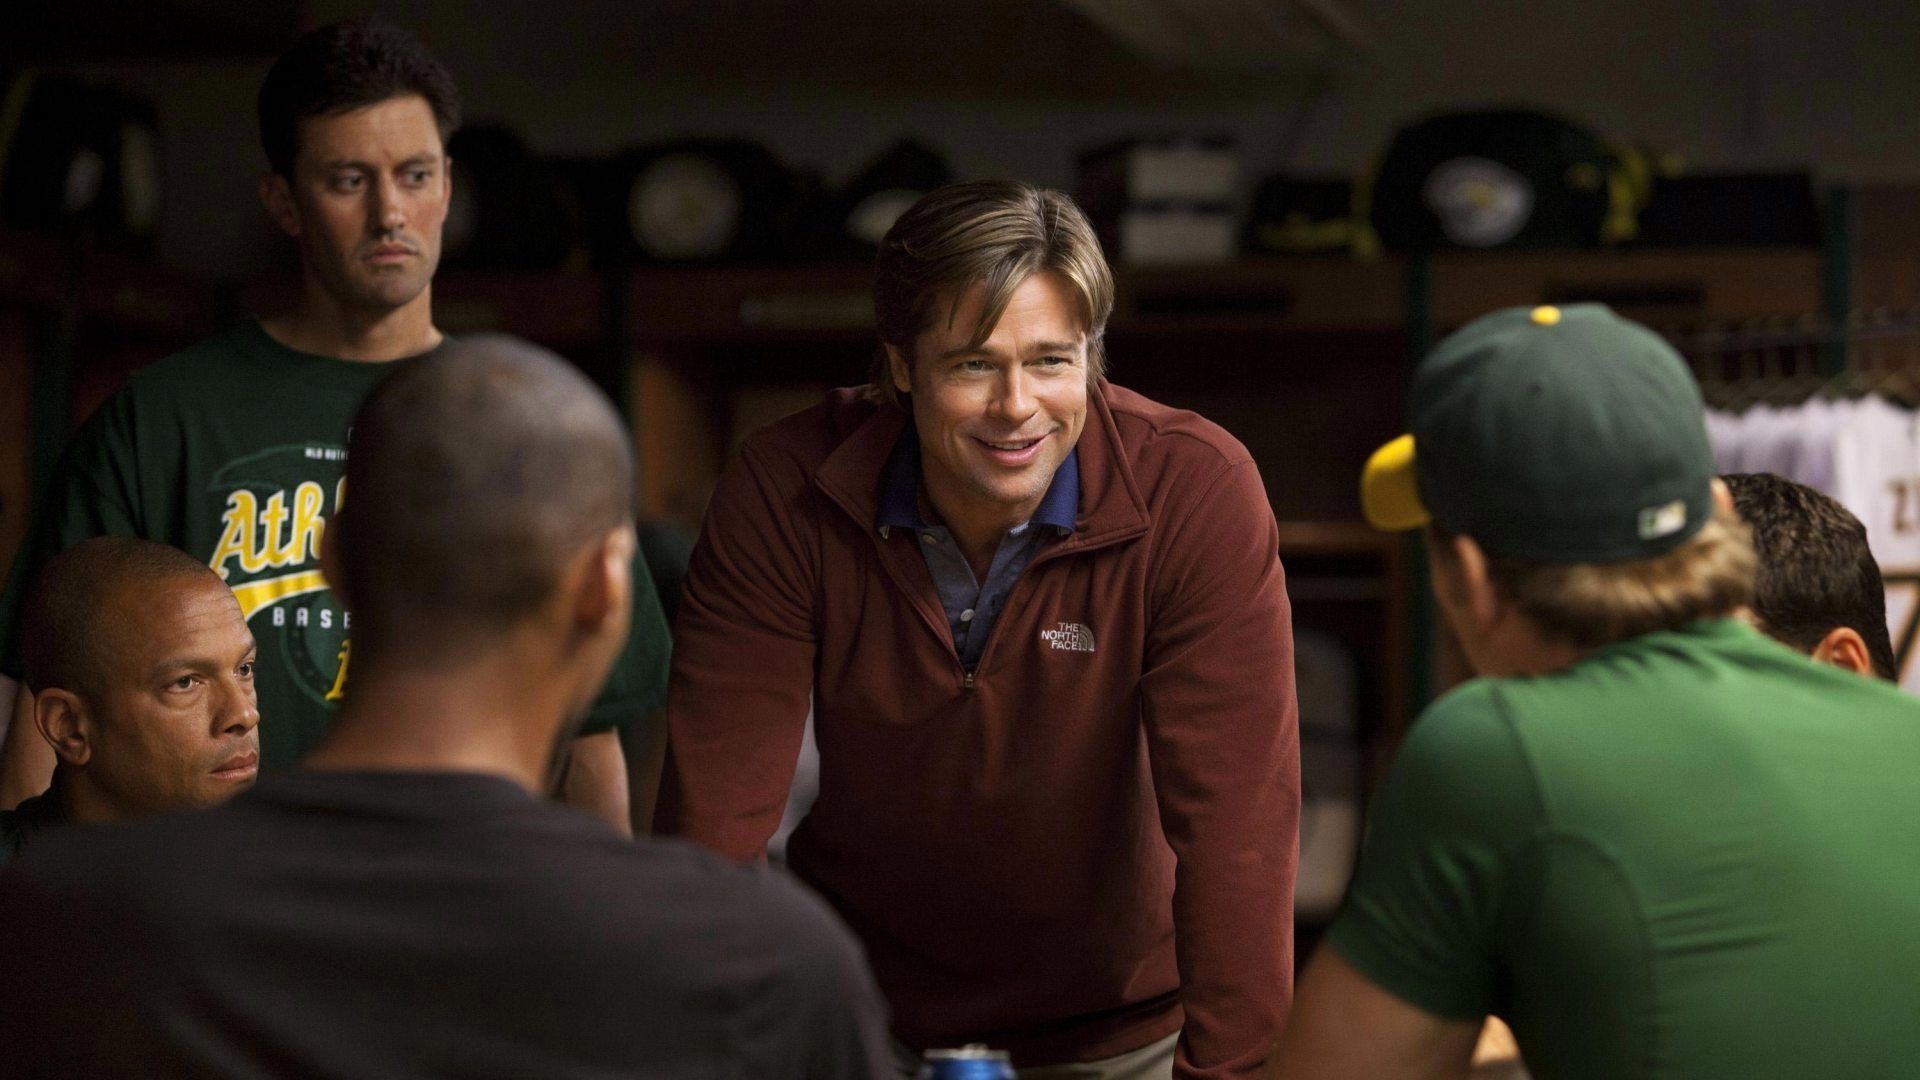 Moneyball: Brad Pitt was being courted to star in the film in October 2008. 1920x1080 Full HD Wallpaper.